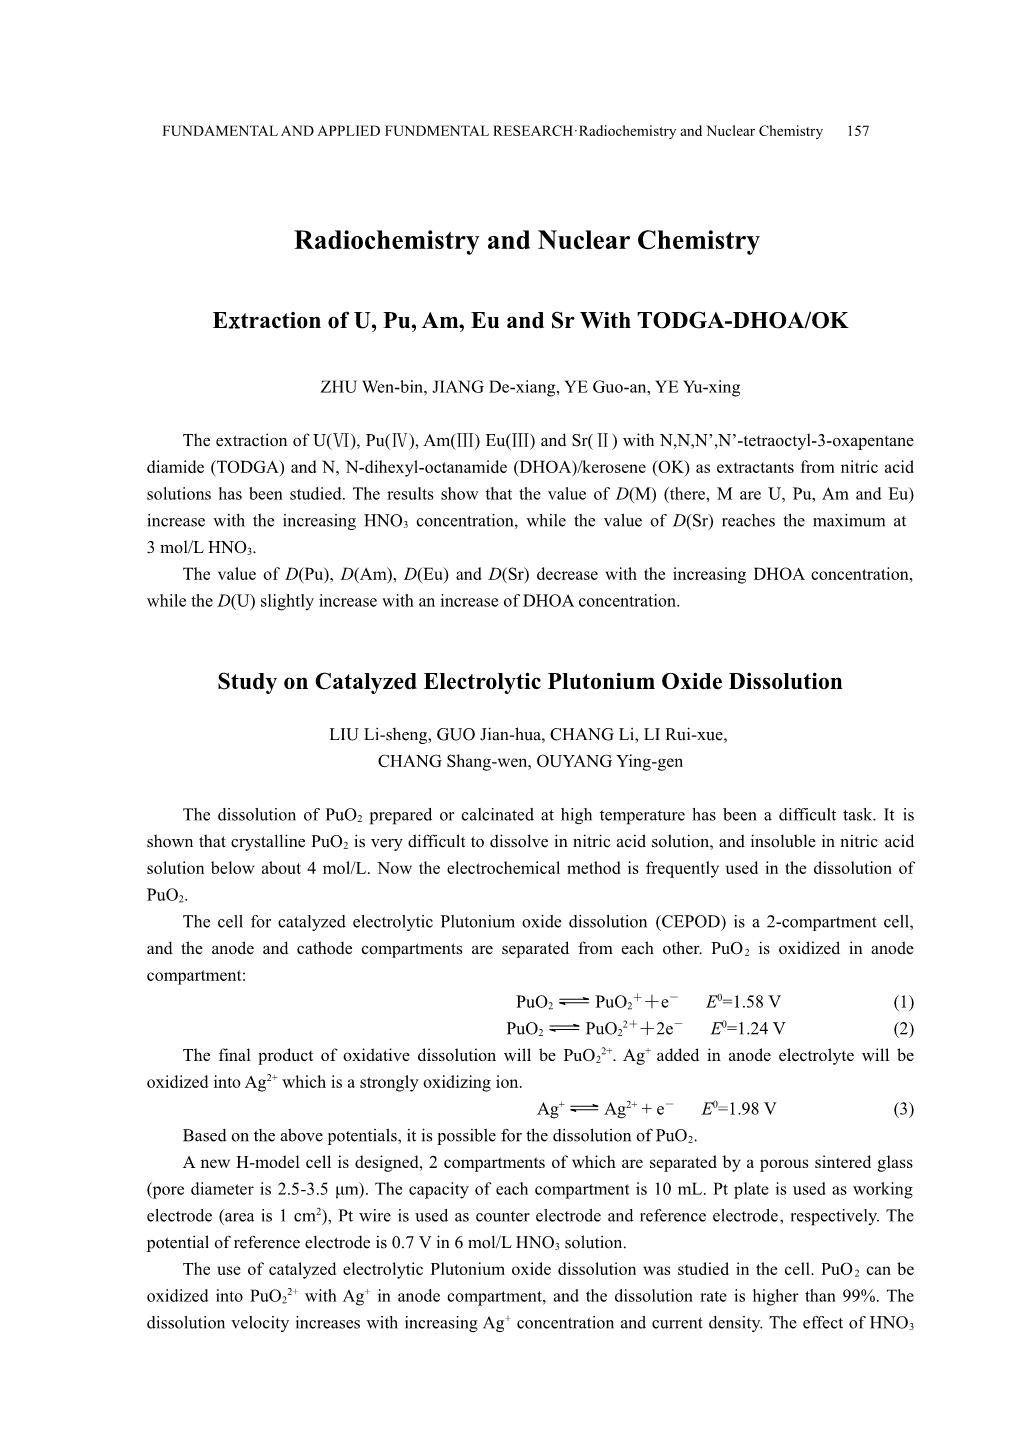 FUNDAMENTAL and APPLIED FUNDMENTAL RESEARCH Radiochemistry and Nuclear Chemistry 173